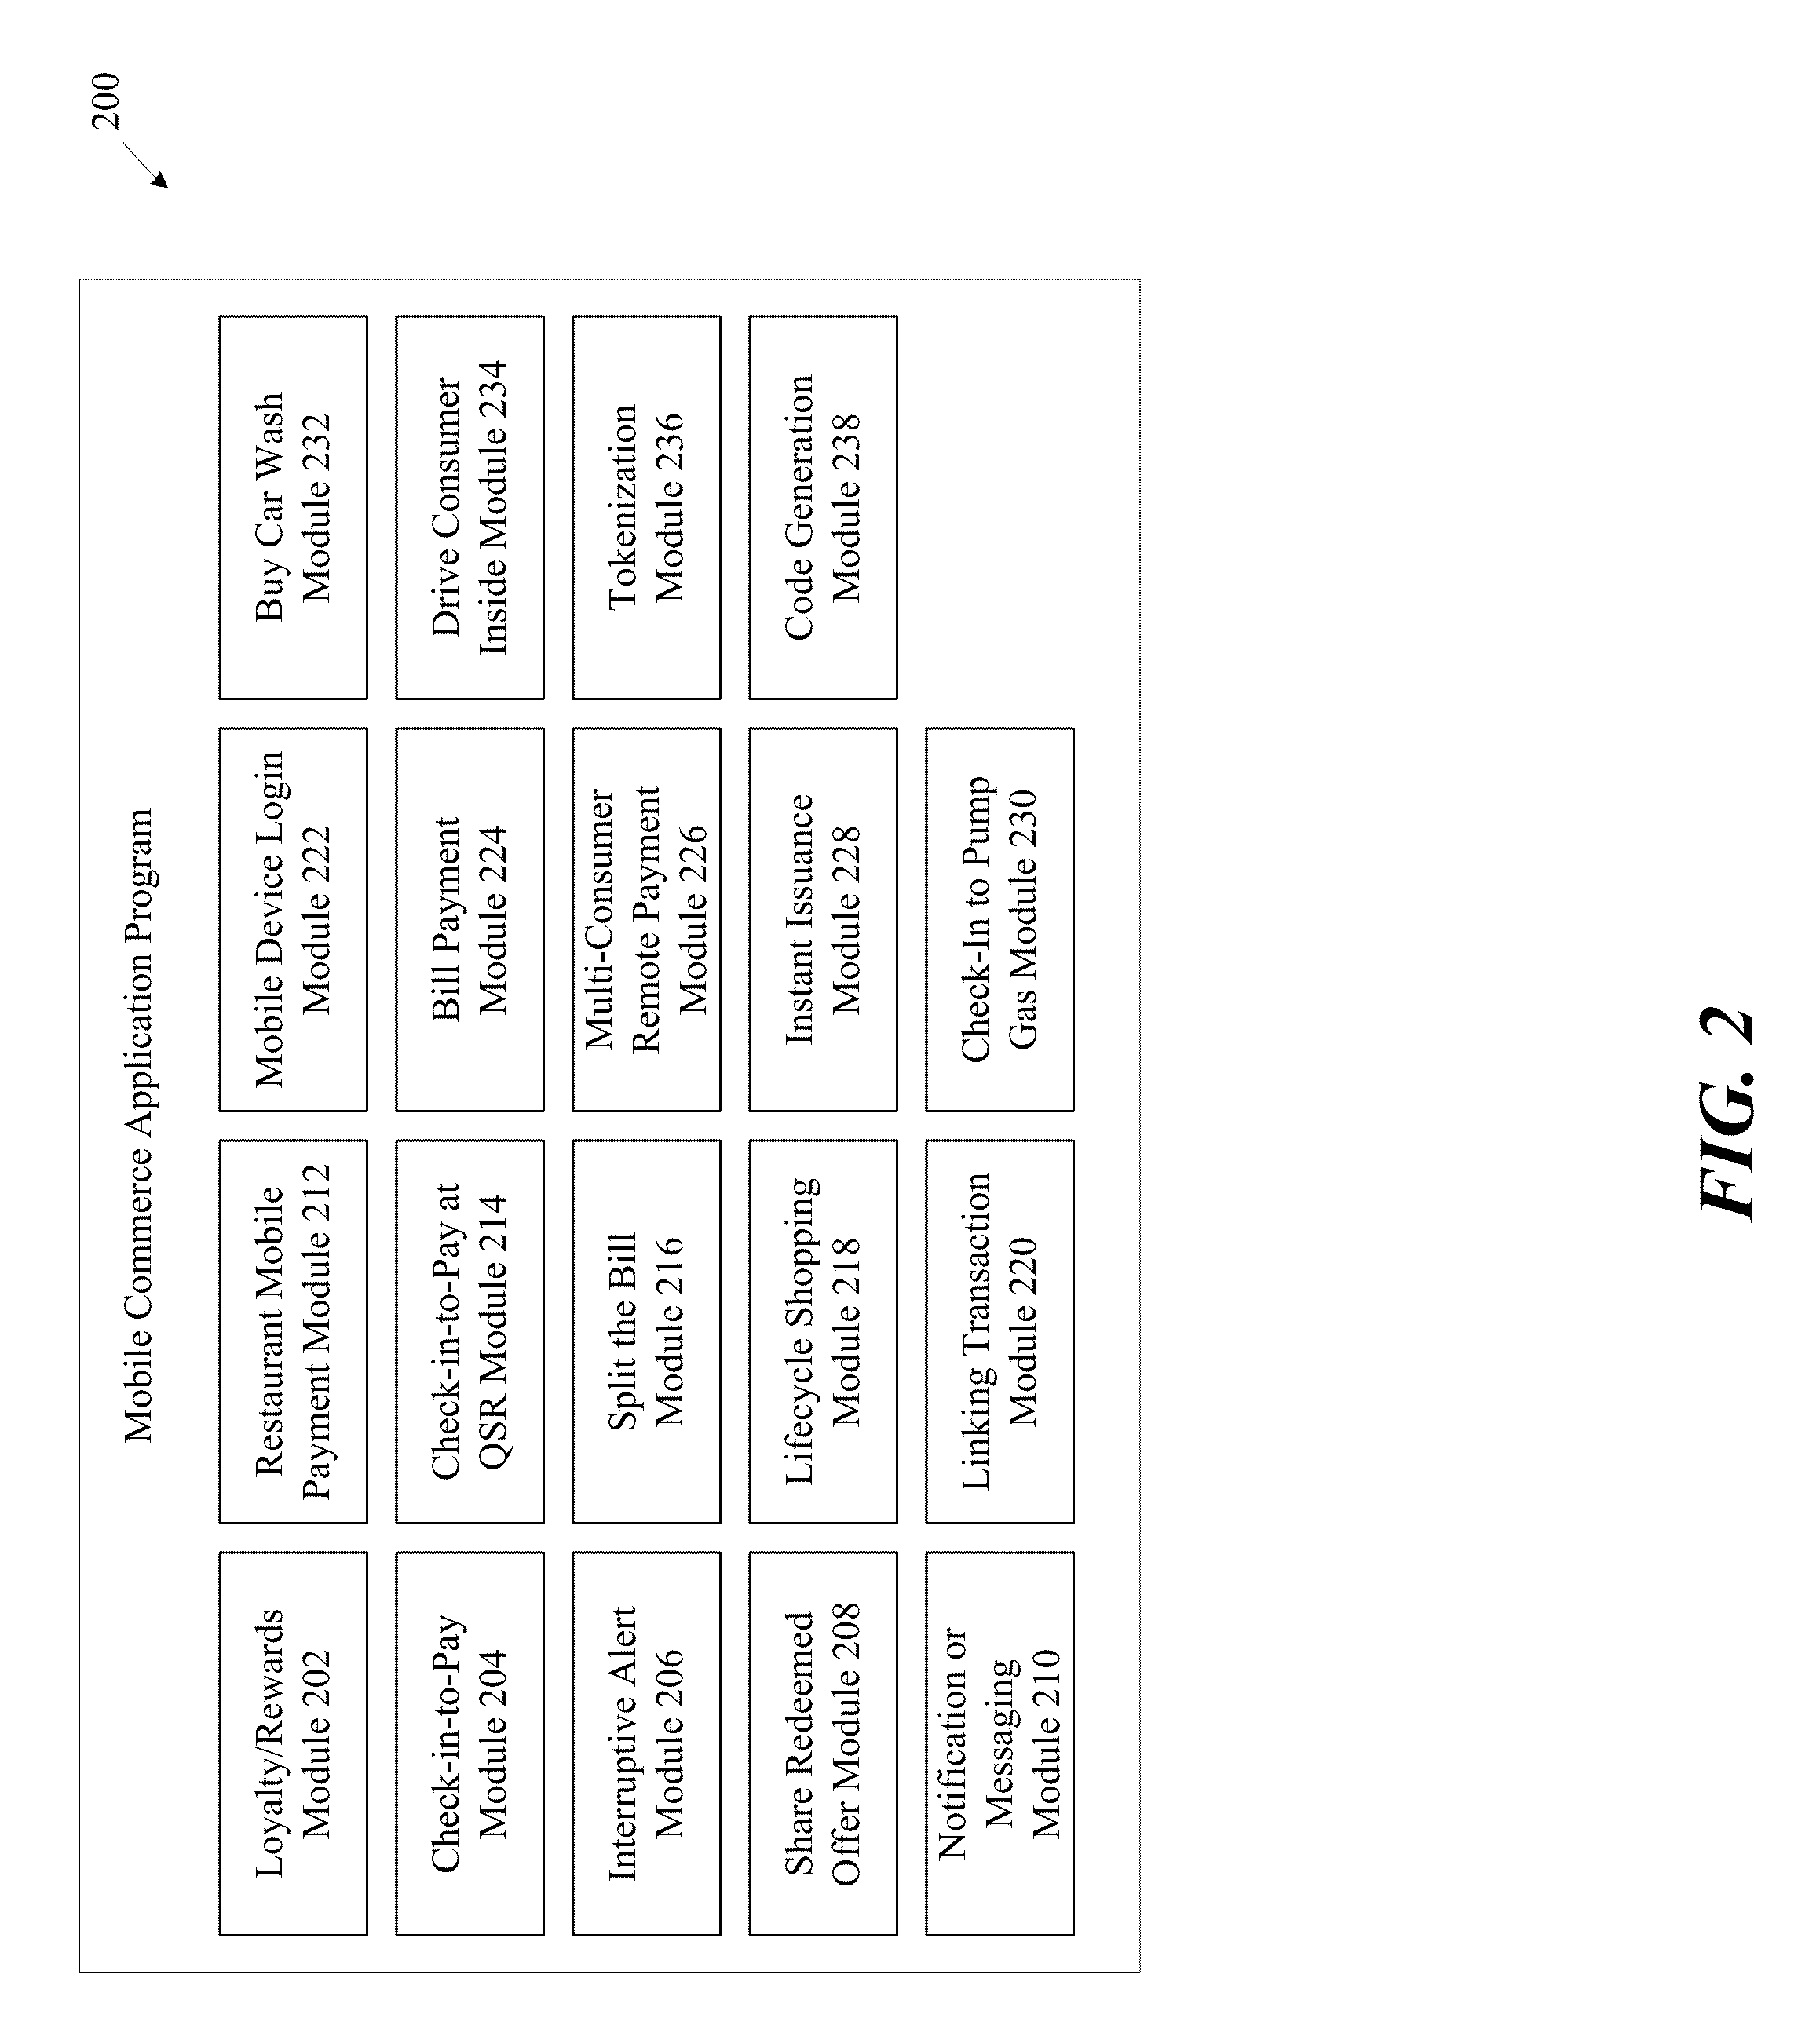 Systems and methods for facilitating remote authorization and payment of goods via mobile commerce